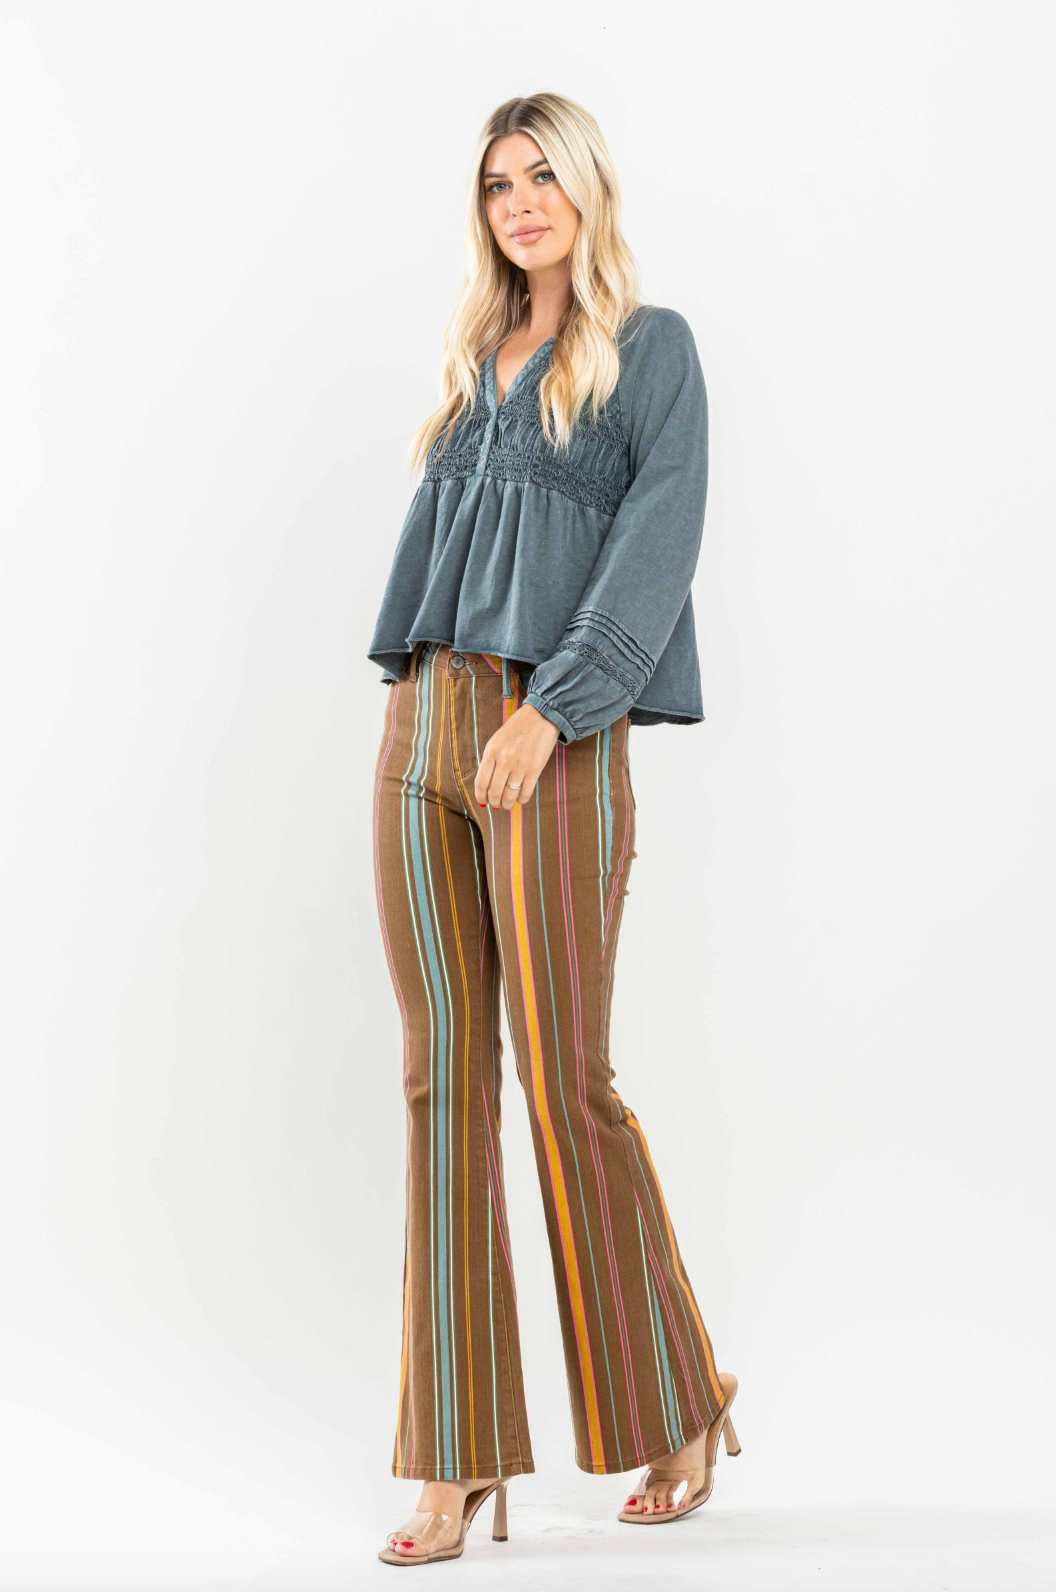 Judy Blue Striped Flare Jeans